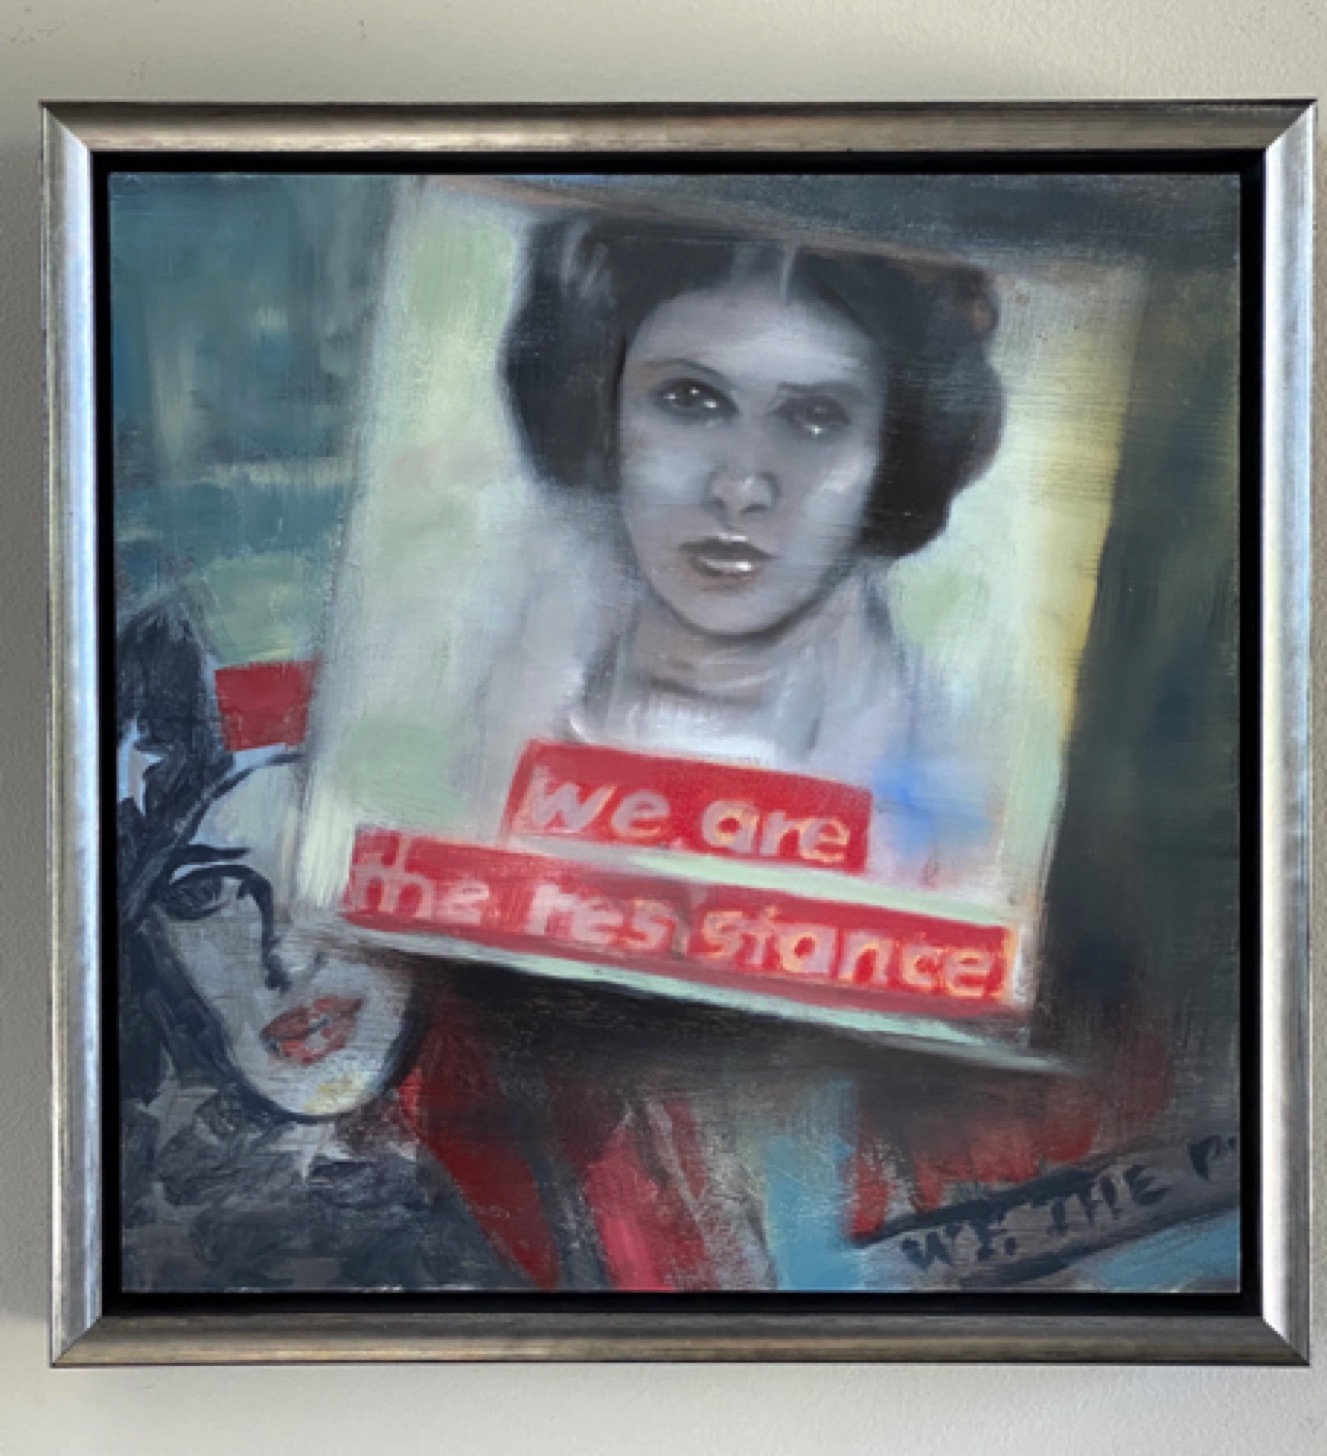 Gregg Chadwick
Carrie Fisher - We Are the Resistance
12"x12" oil on panel 2018 
Pepi Kelman & Coles Brewer Collection, Pacific Palisades, California